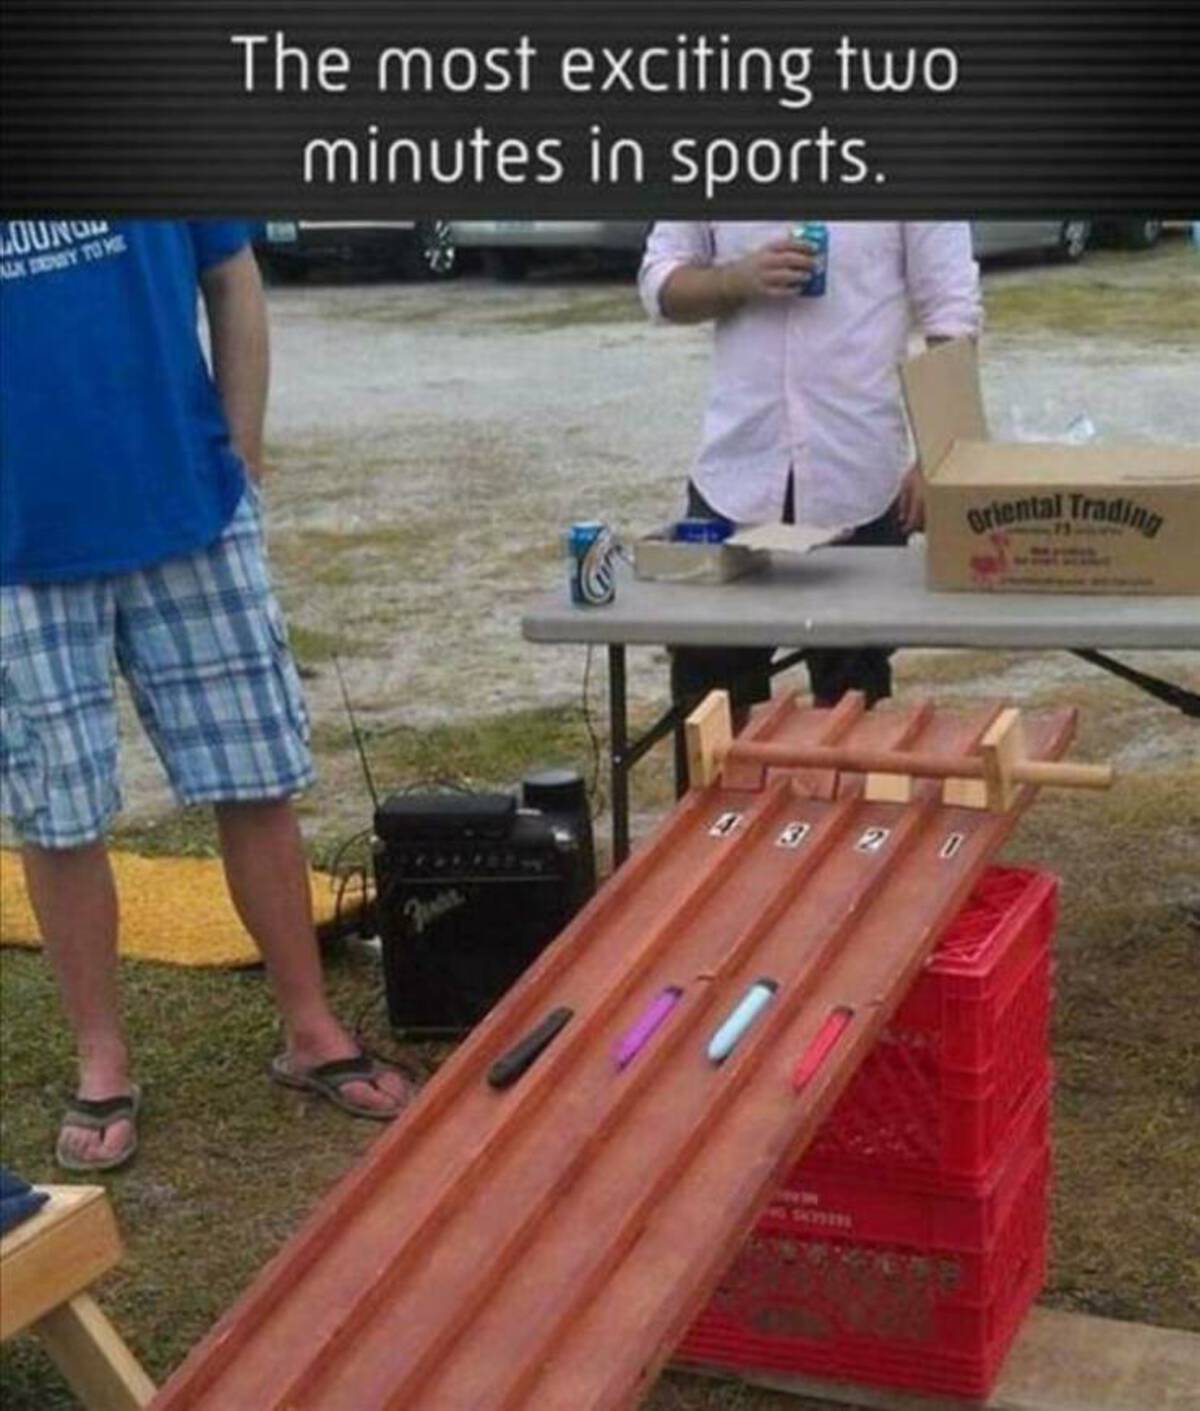 xylophone - Loung Alk Day To Me The most exciting two minutes in sports. 2 Oriental Trading